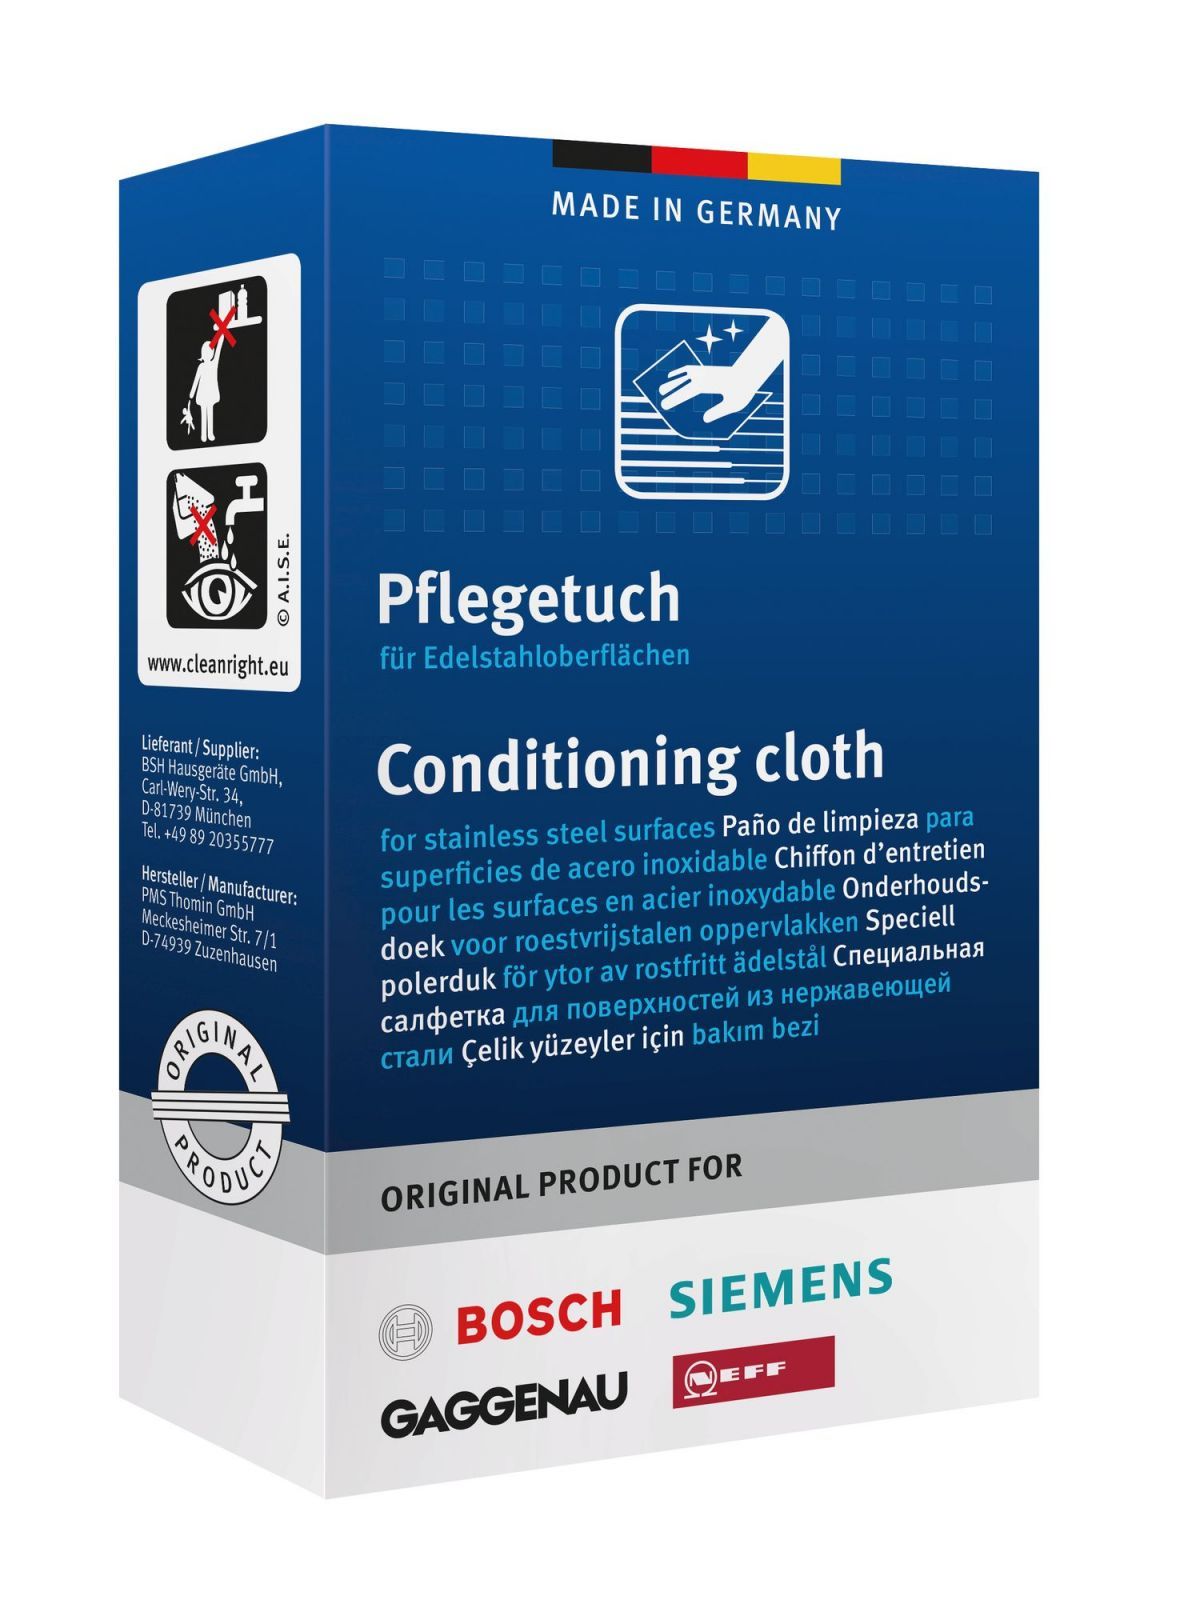 Cleaning Kit for Care for Universal Stainless Steel Surfaces - 00311944 BSH - Bosch / Siemens